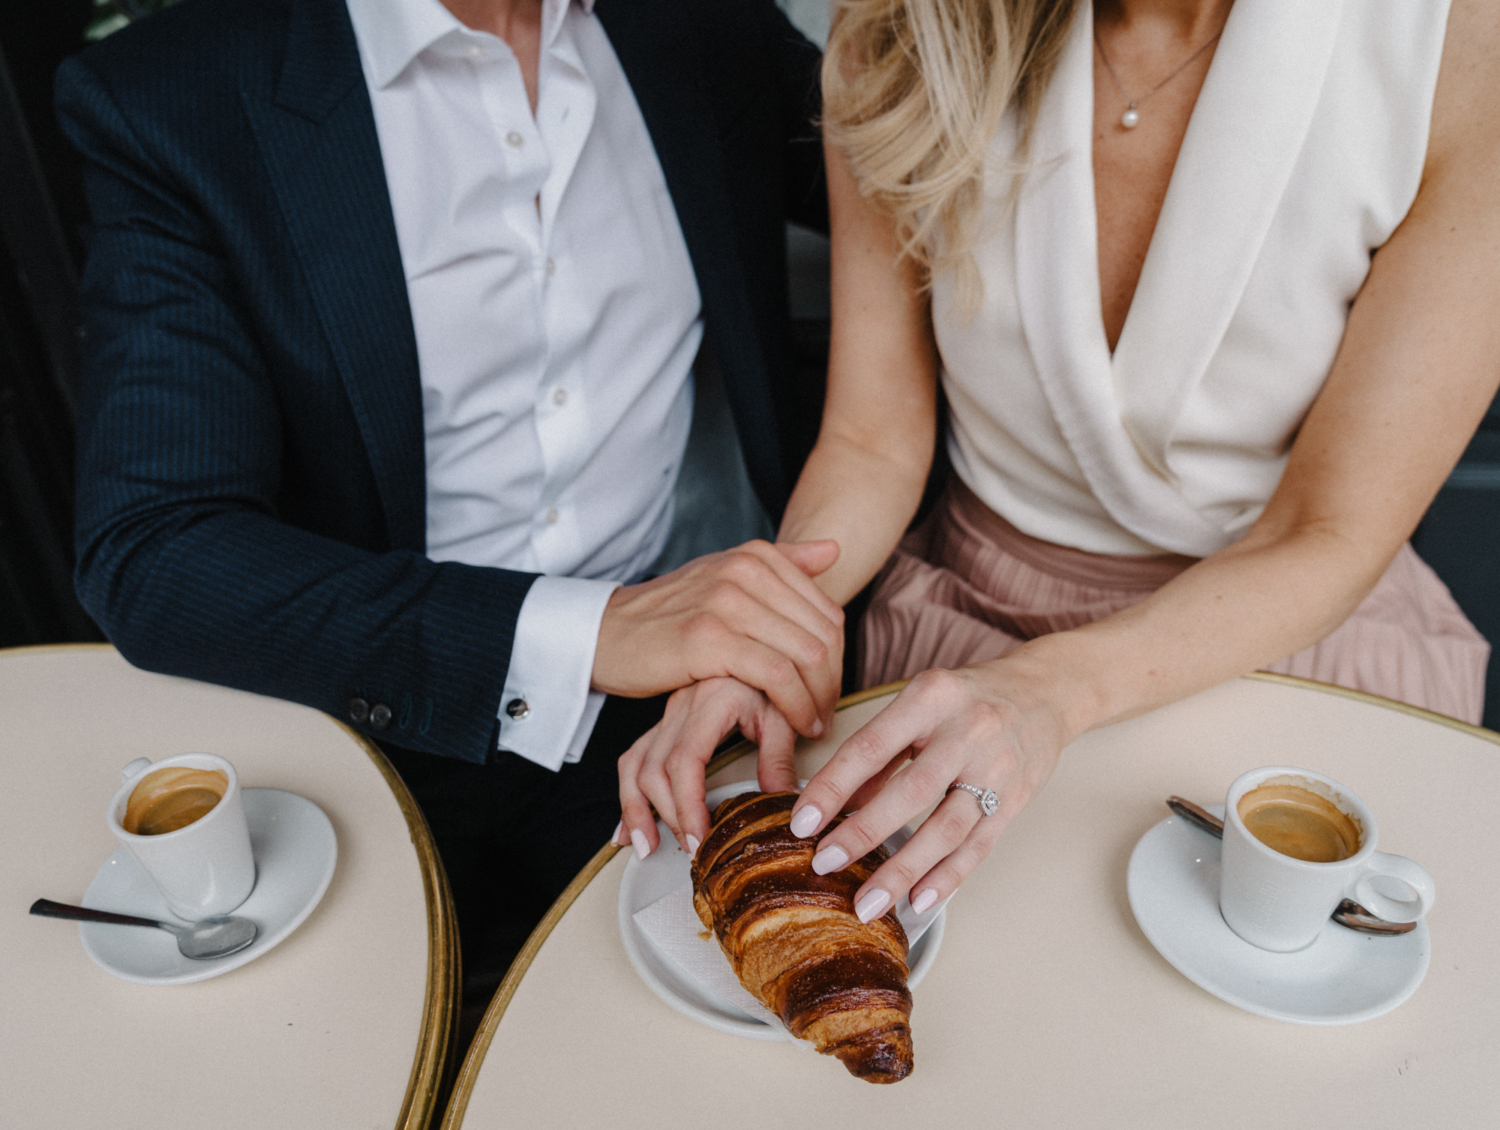 woman shows off engagement ring touching croissant in paris